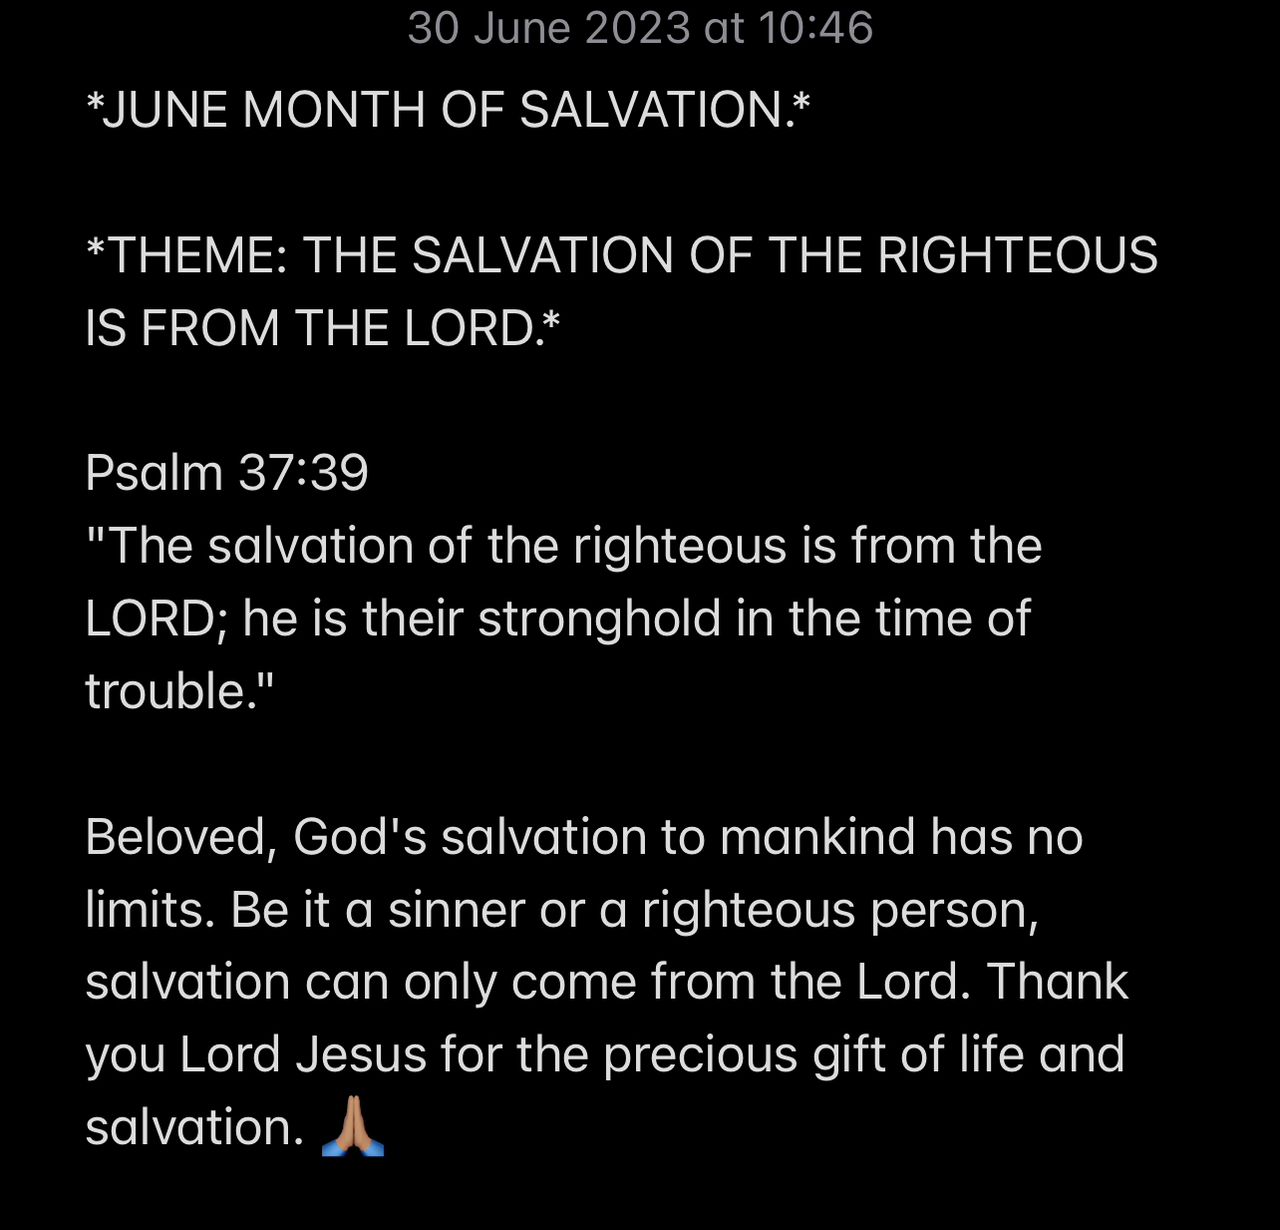 THE SALVATION OF THE RIGHTEOUS IS FROM THE LORD.